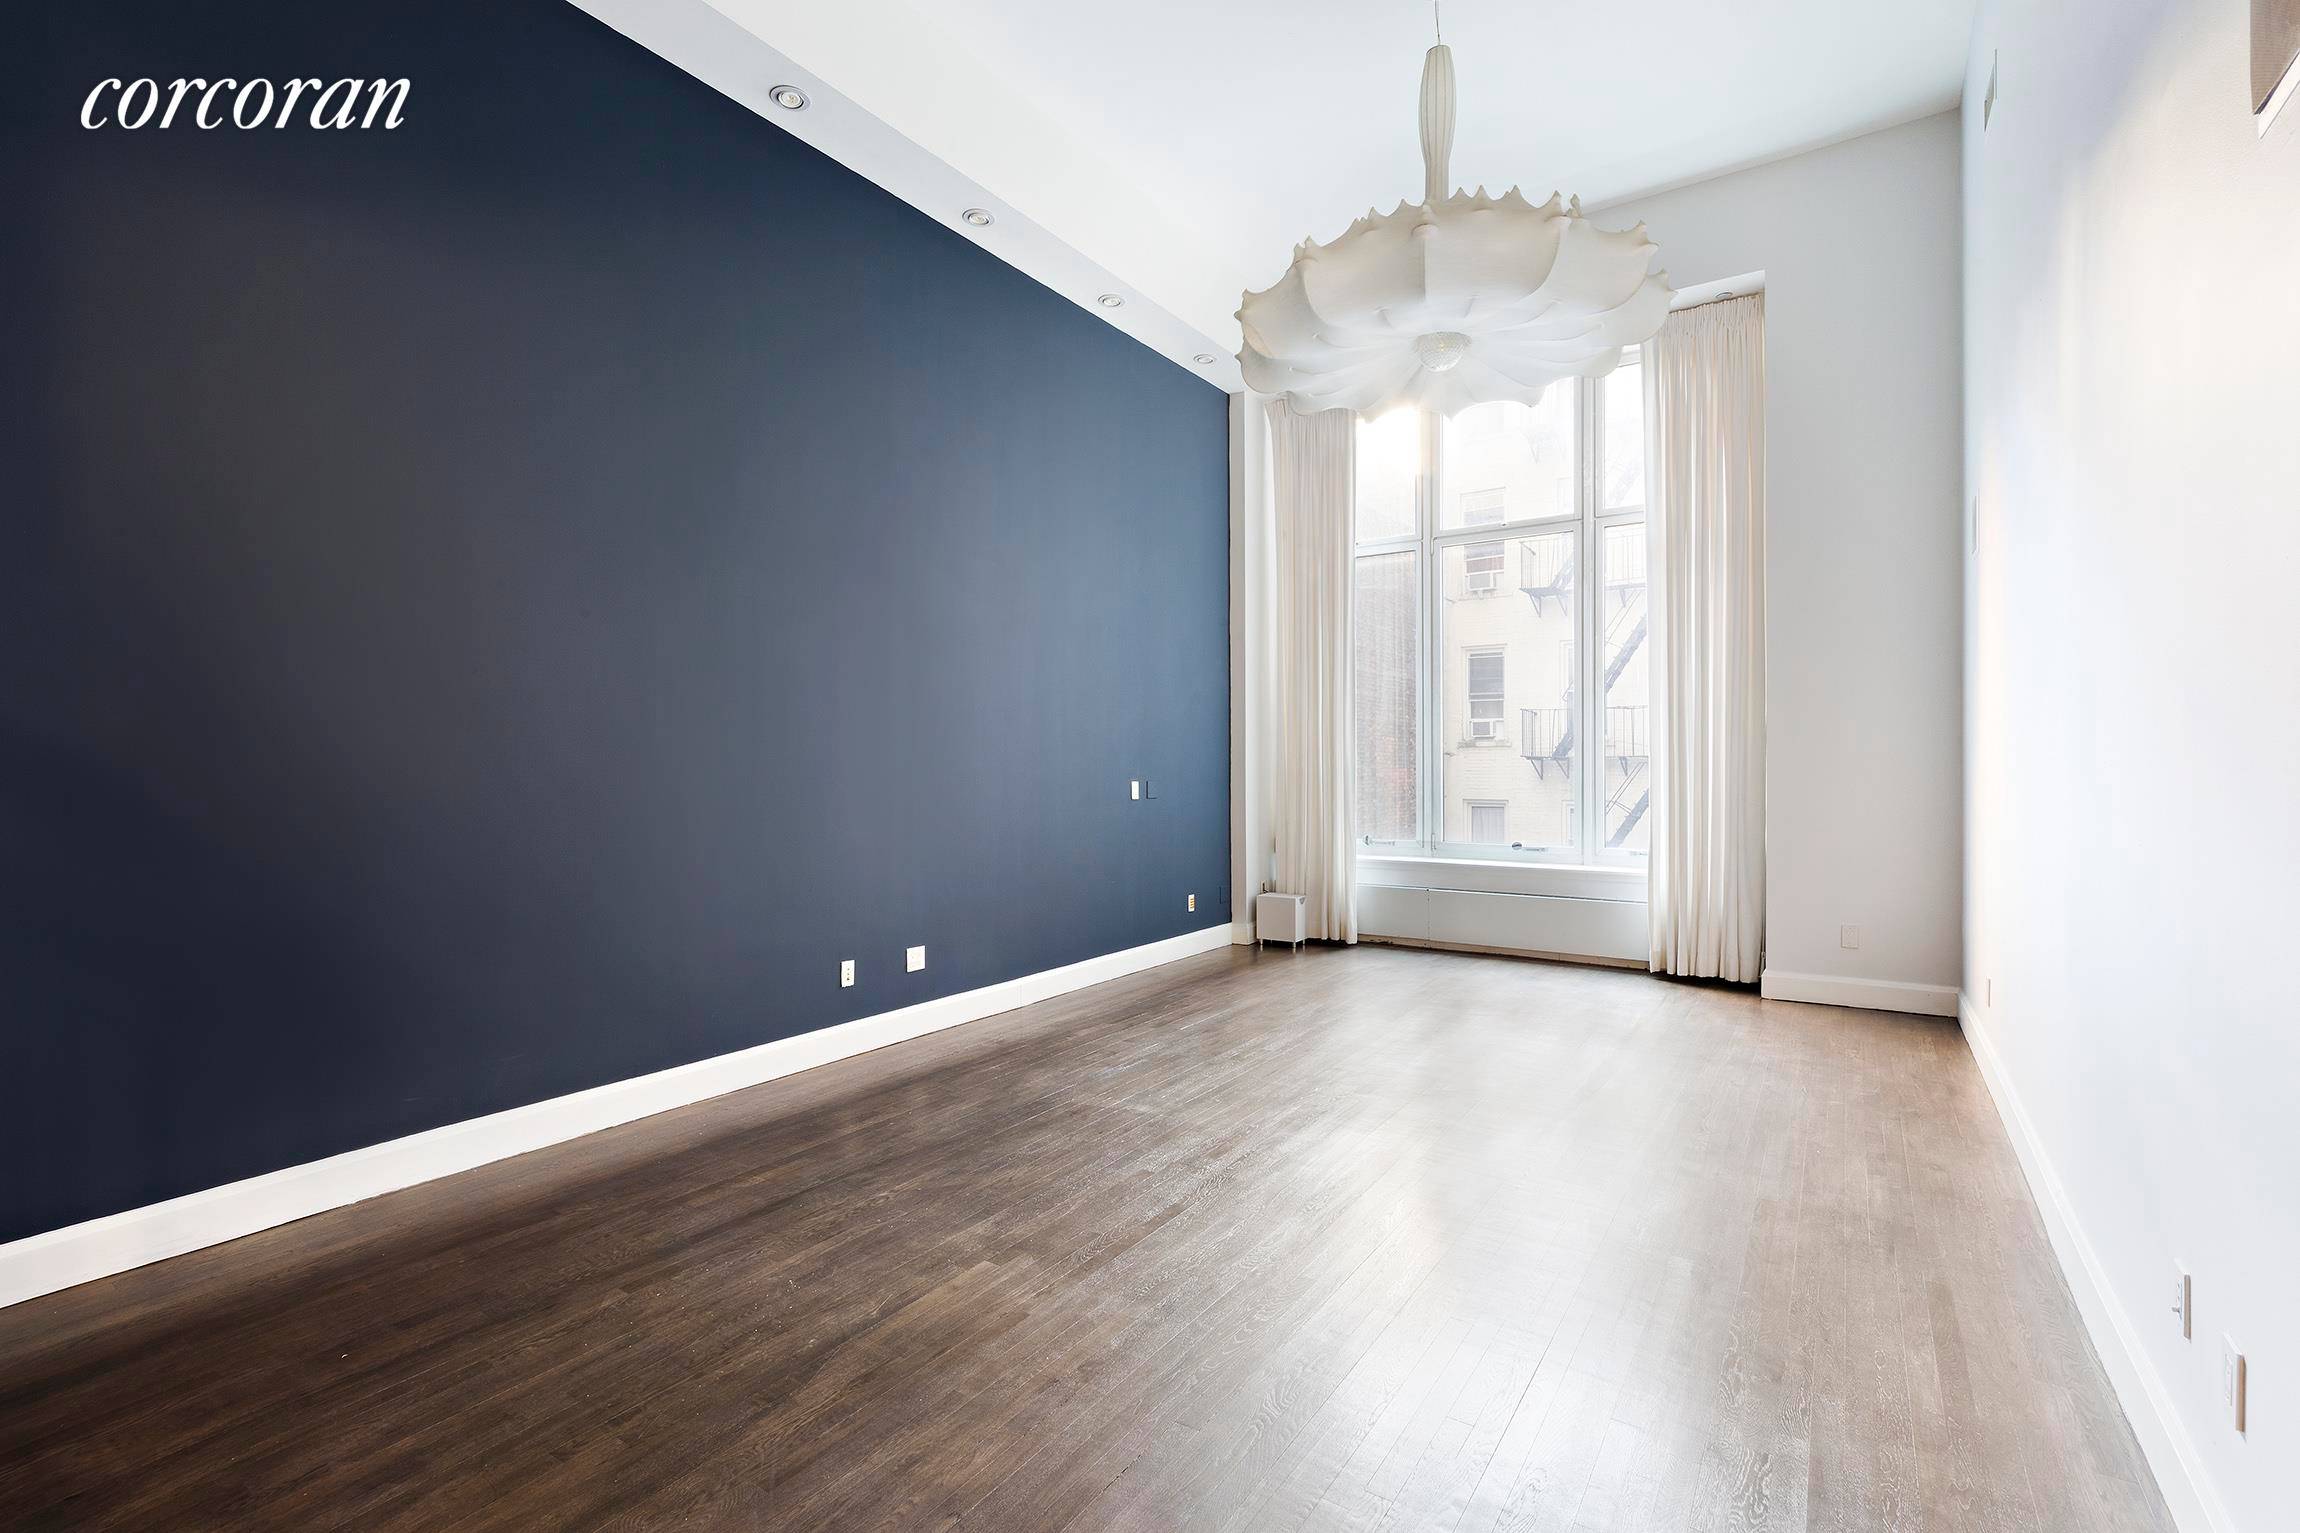 121 West 19th Street, unit 3B, a striking two bedroom, two bath updated duplex apartment in prime Chelsea.